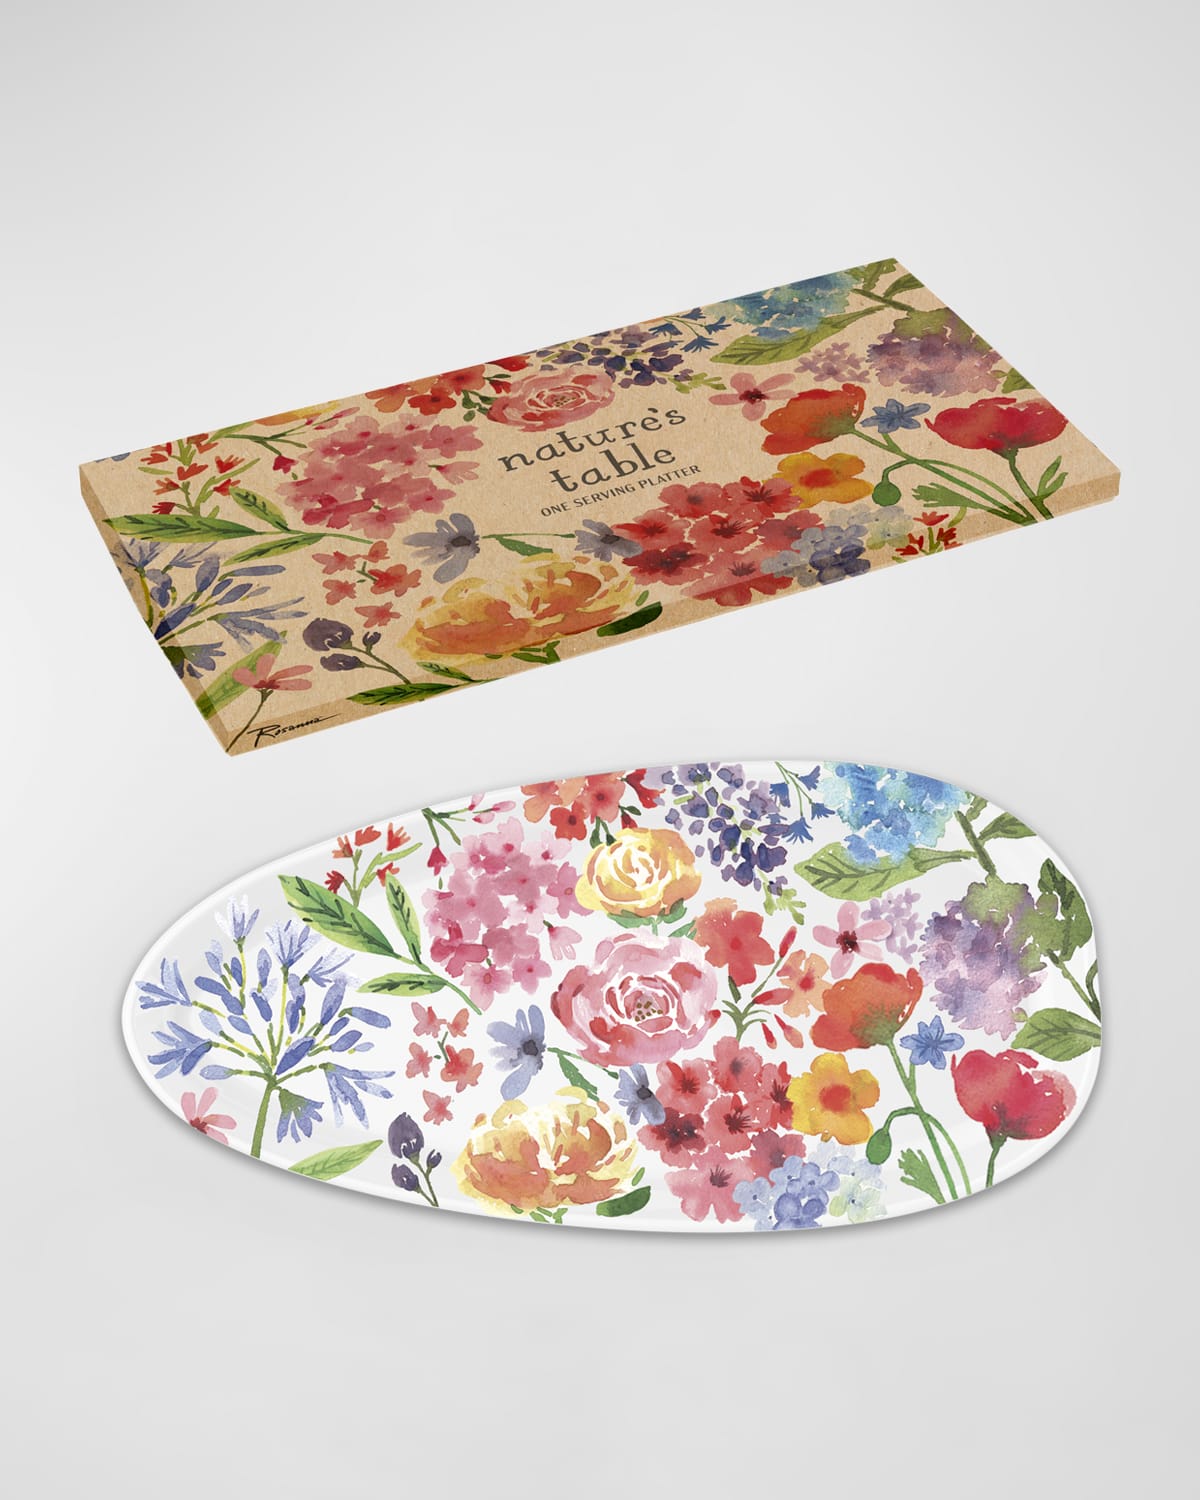 Nature's Table Floral Platters - Set of 2